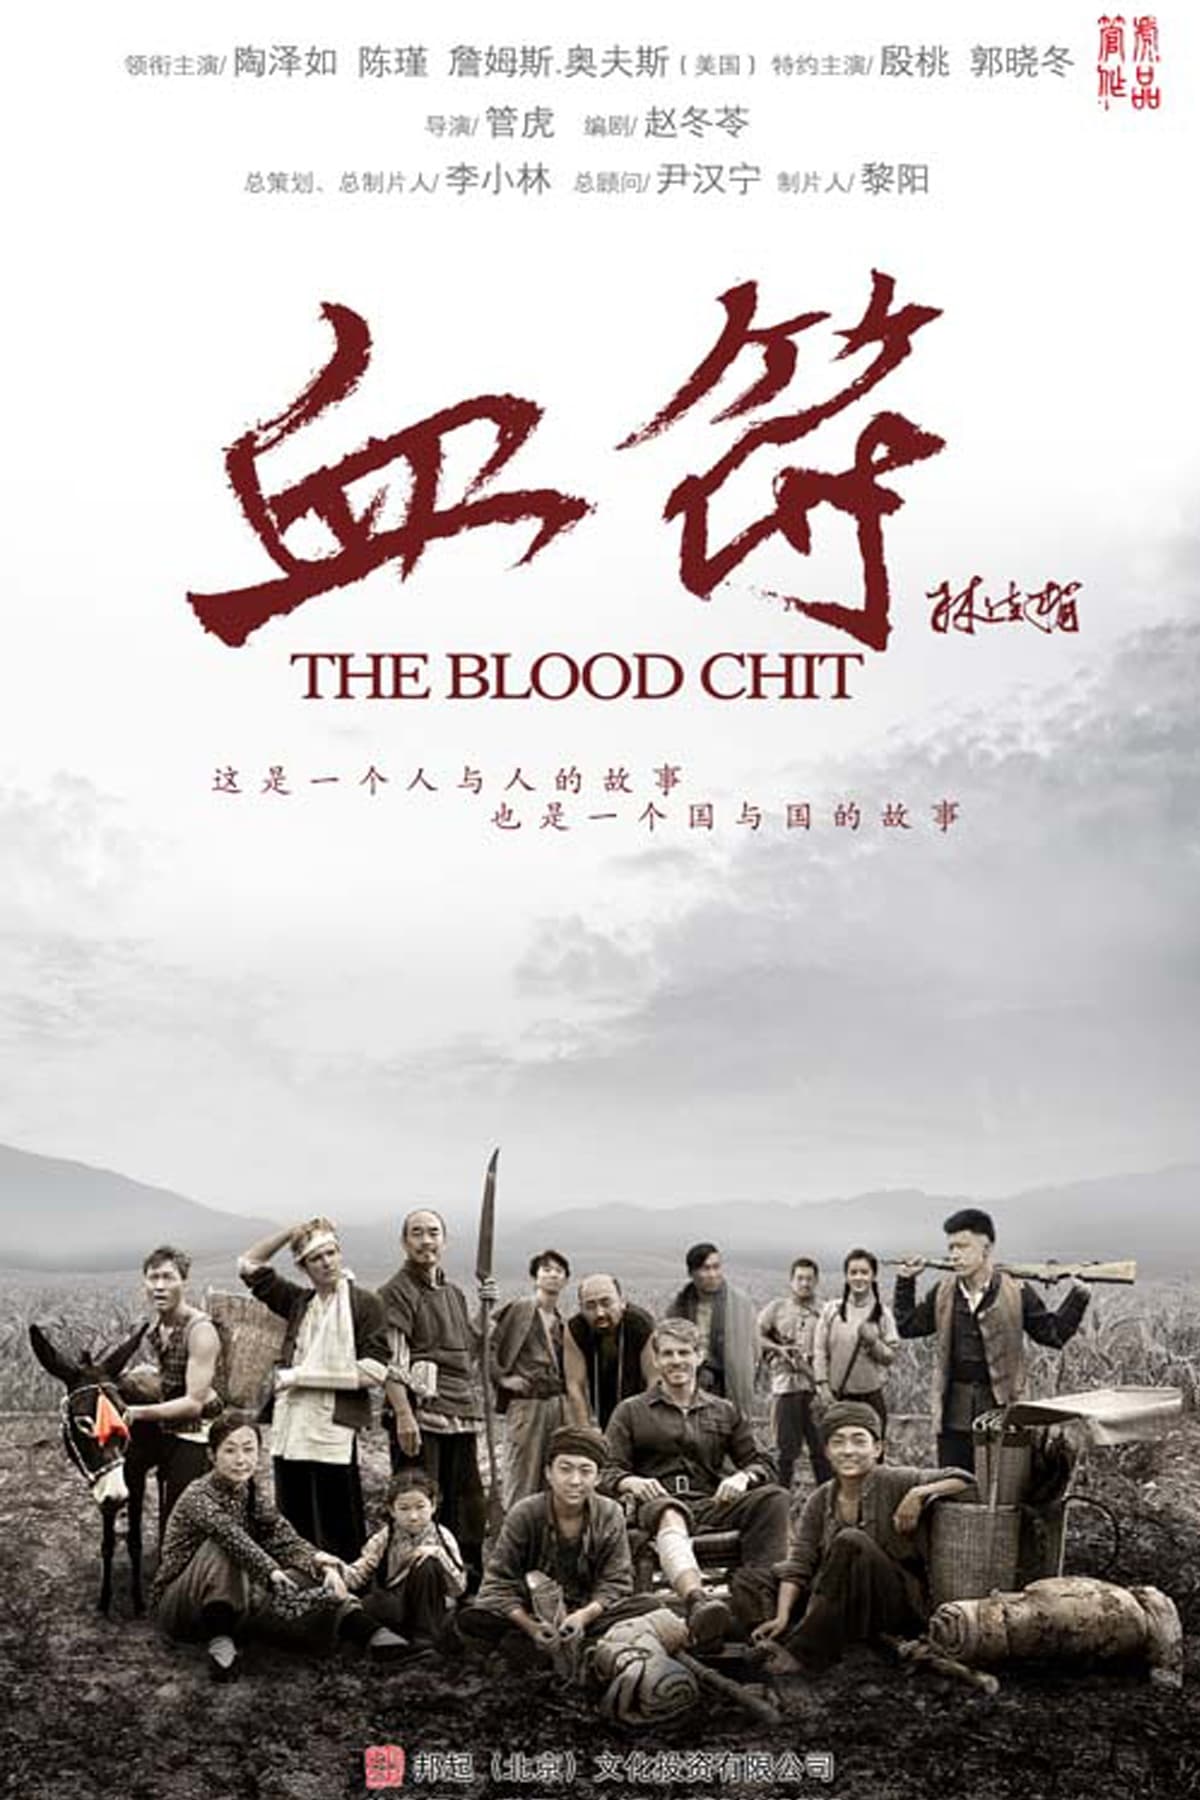 The Blood Chit